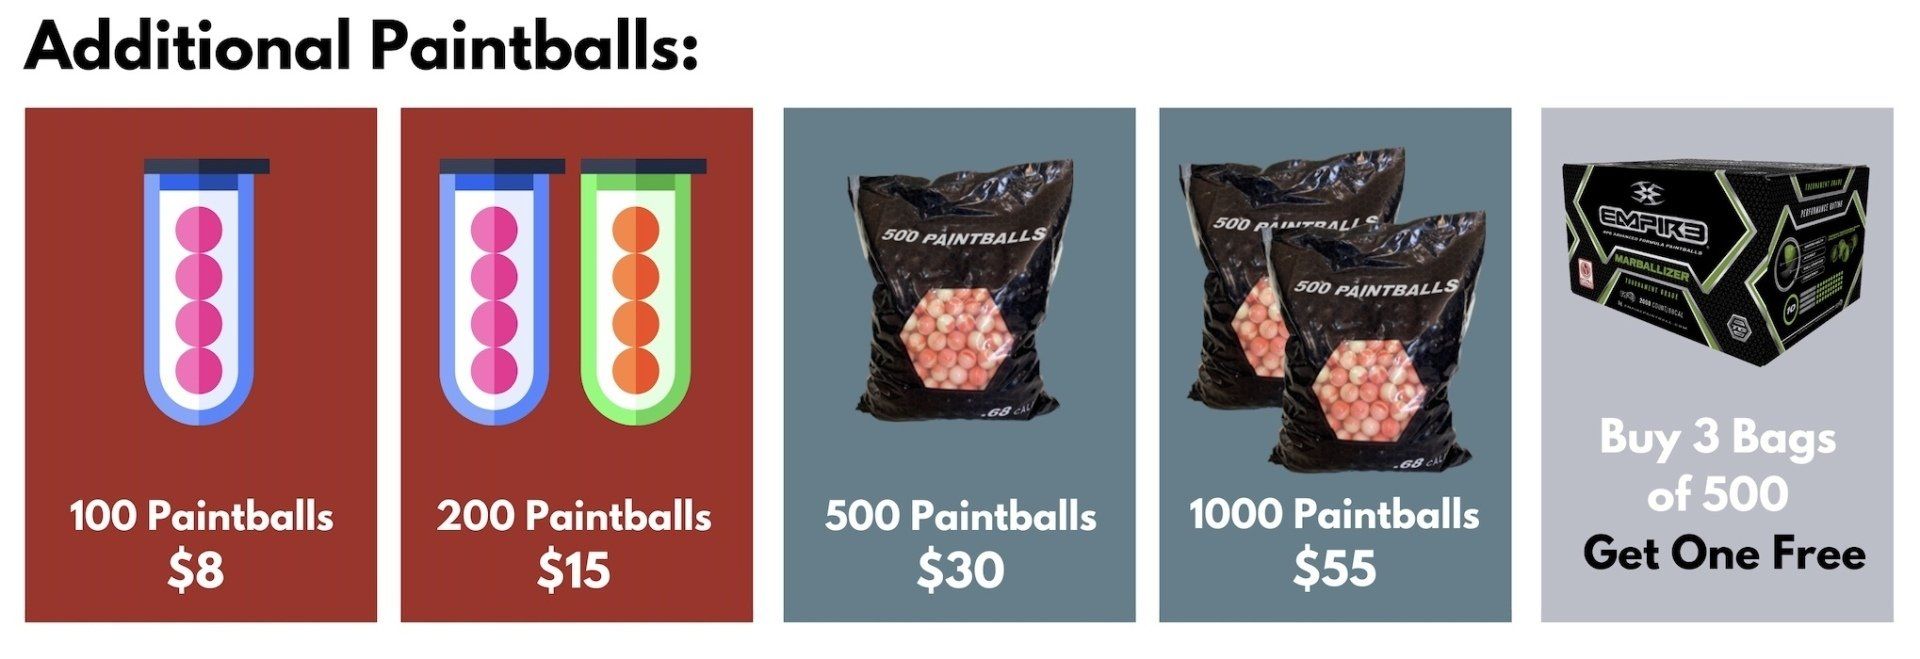 Traditional Paintball Rates